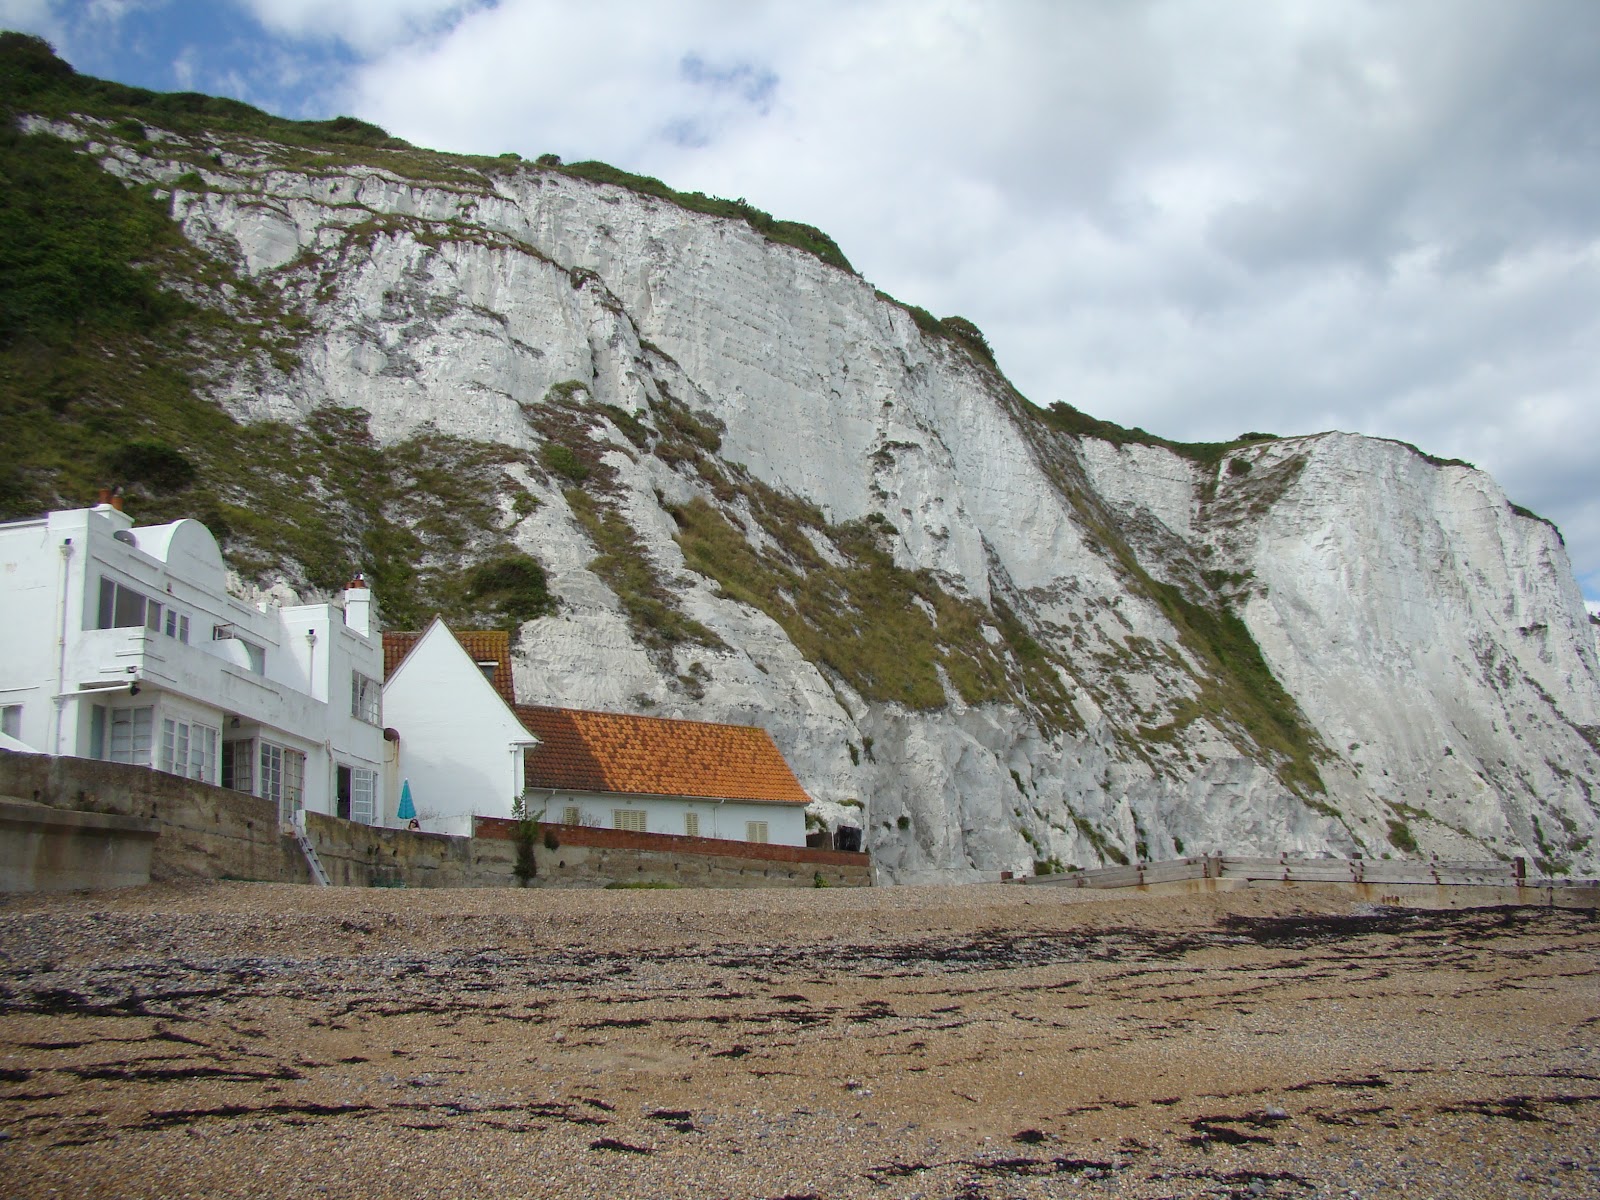 Lori and Tim in the UK: Canterbury, White Cliffs of Dover, and Whitstable